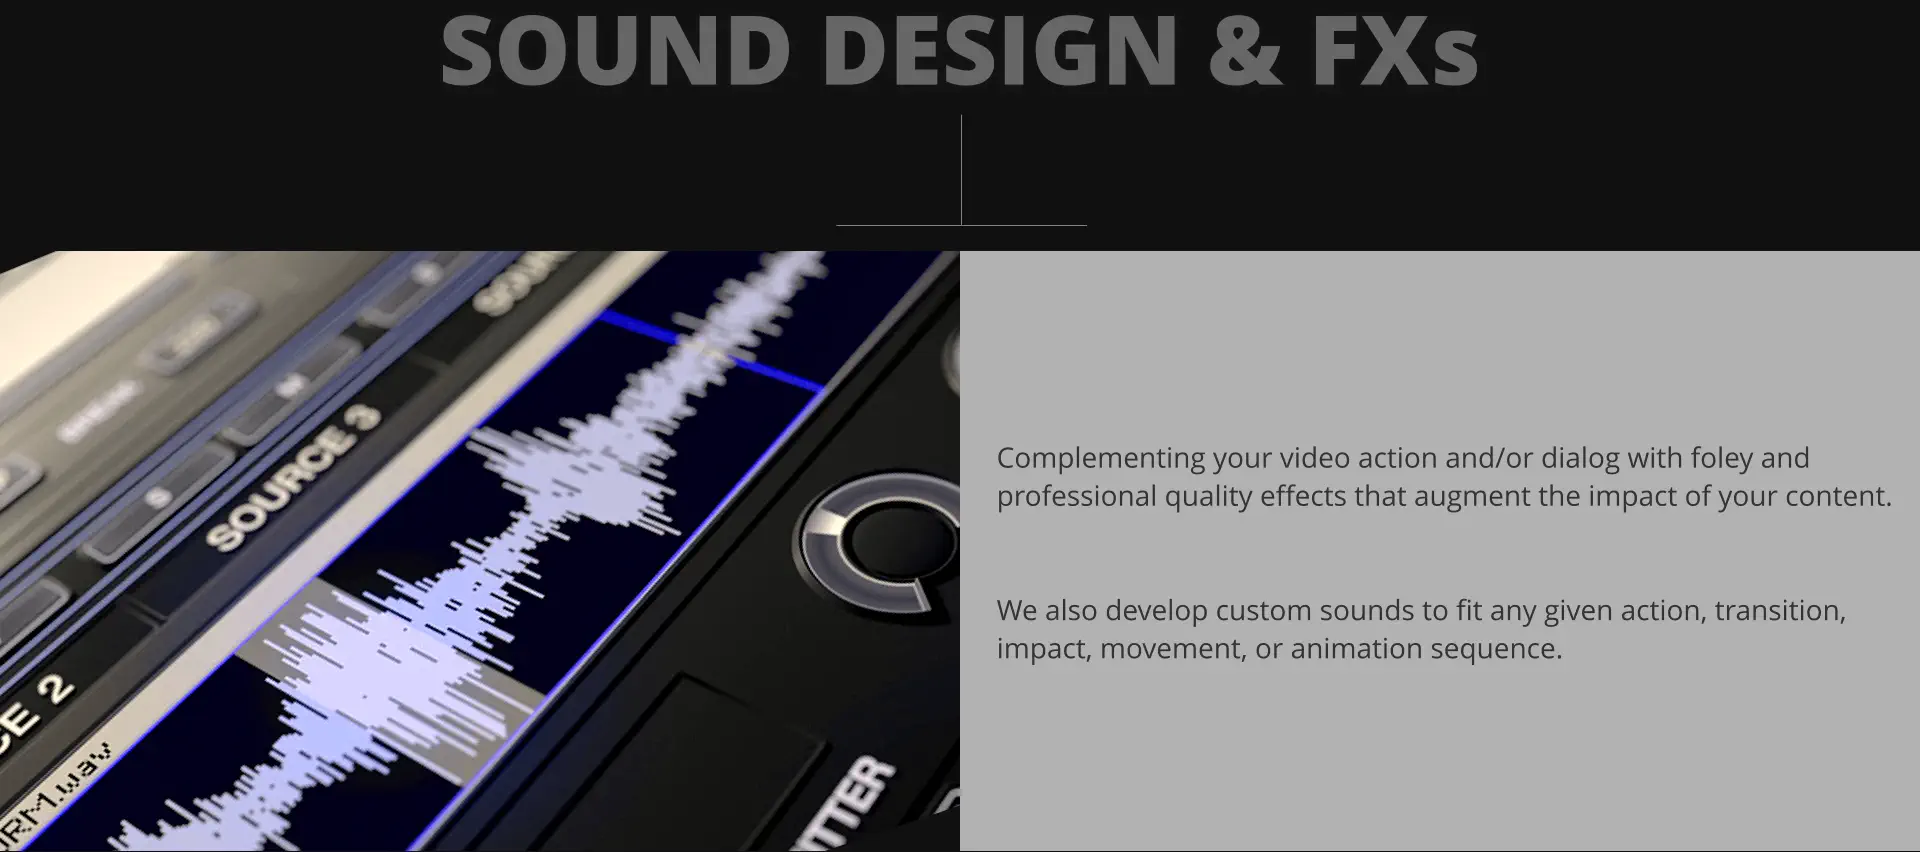 SOUND DESIGN & FXs Complementing your video action and/or dialog with foley and professional quality effects that augment the impact of your content.    We also develop custom sounds to fit any given action, transition, impact, movement, or animation sequence.